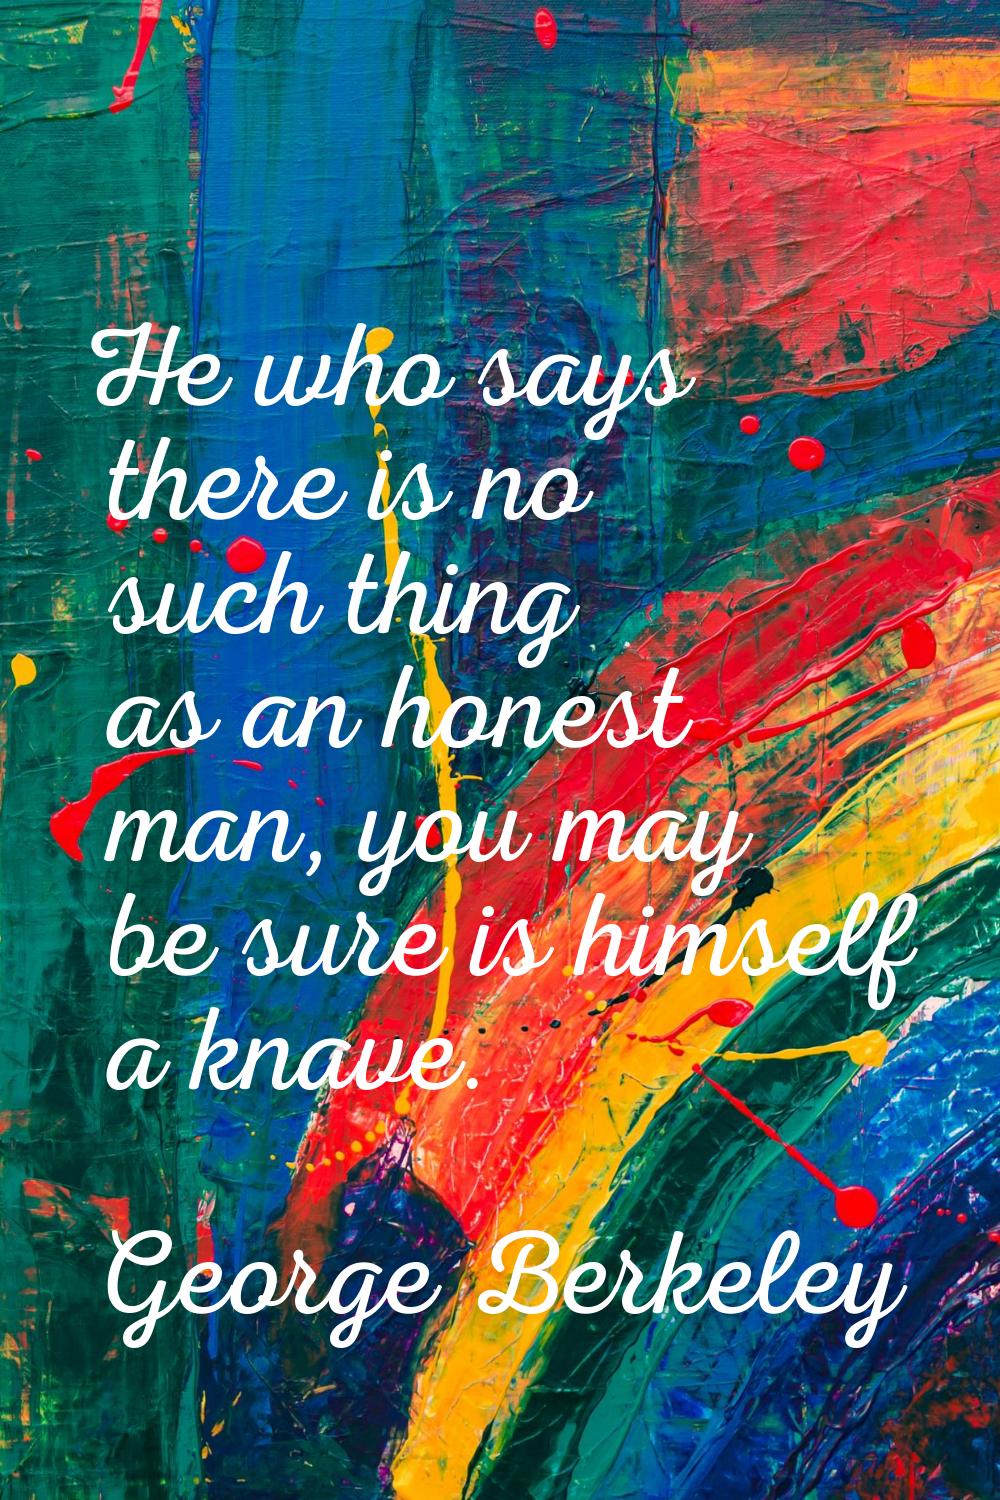 He who says there is no such thing as an honest man, you may be sure is himself a knave.